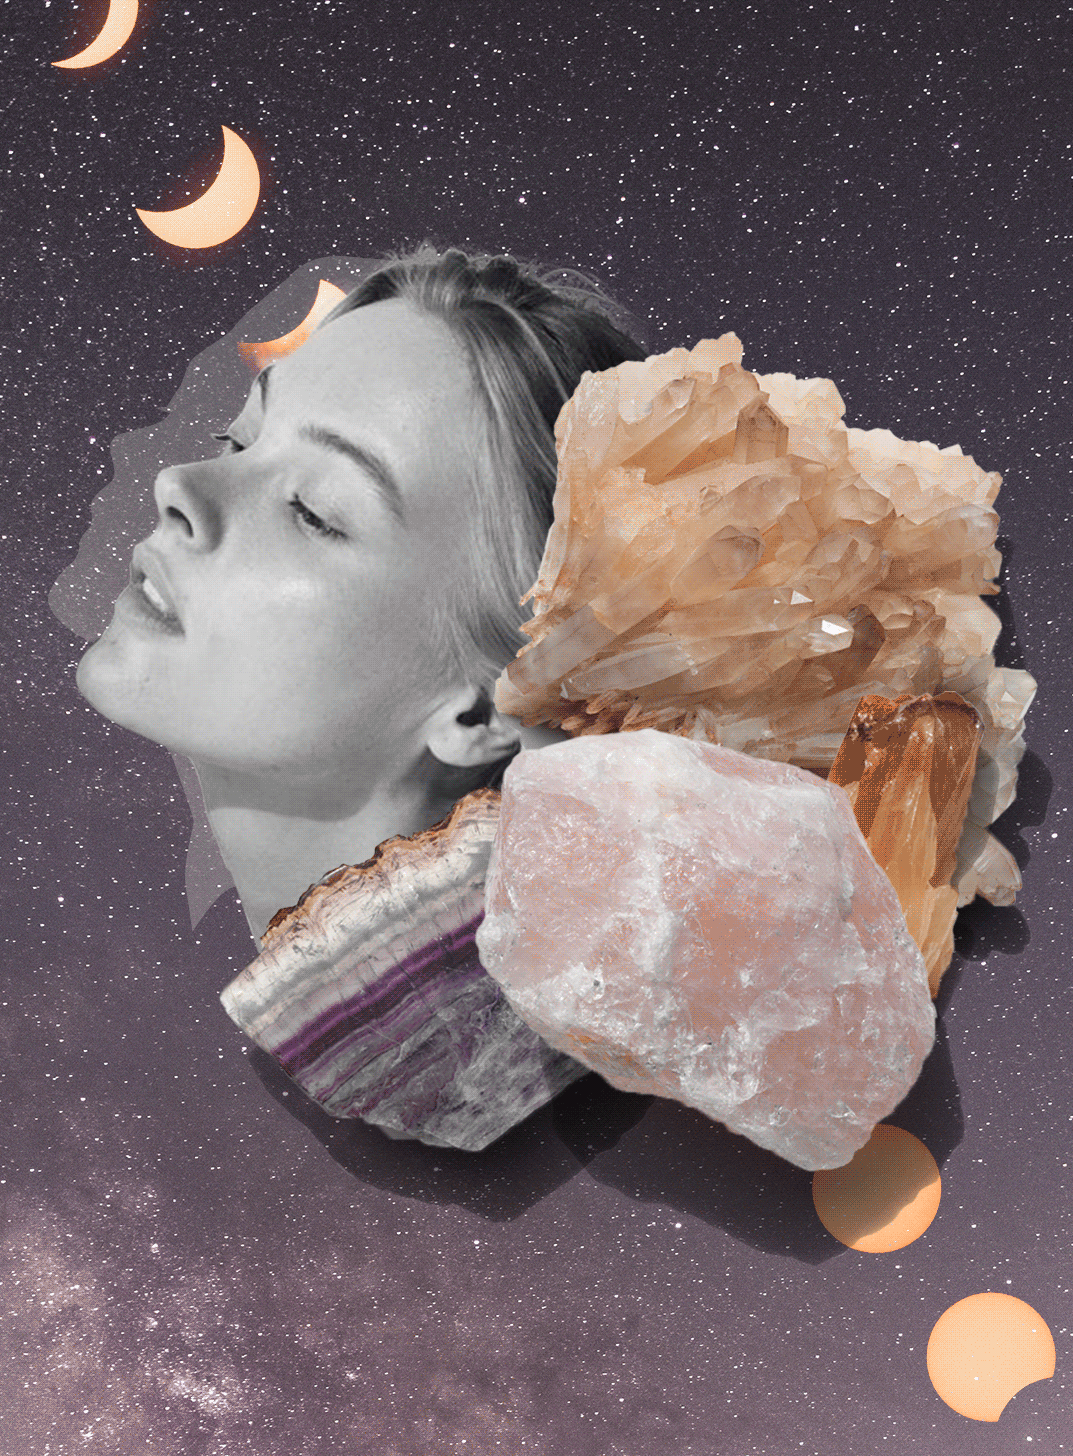 Horoscope image of crystals and moons with a model in centre